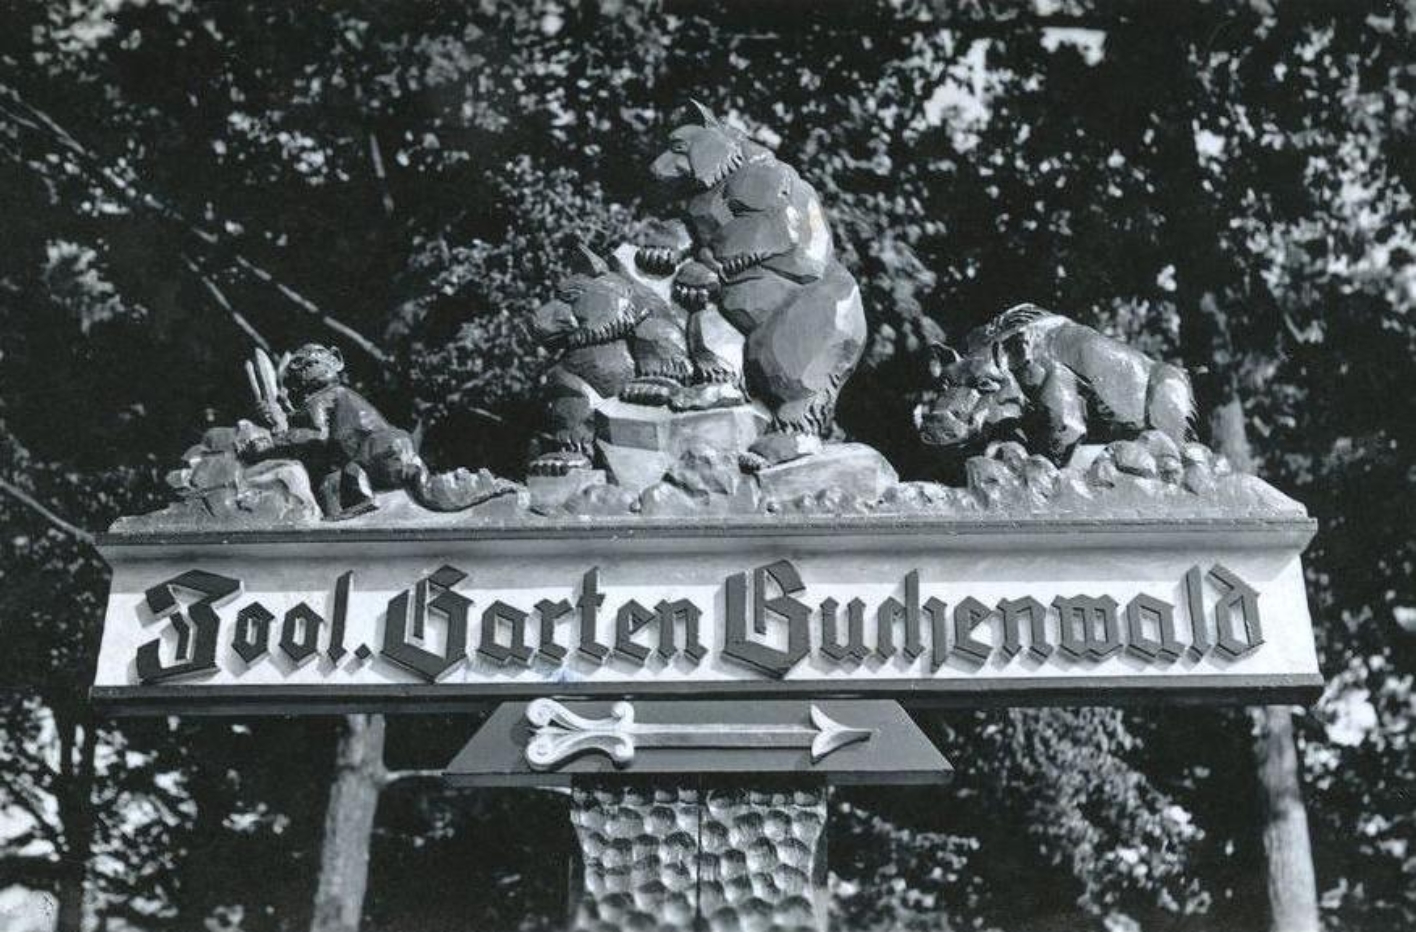 A hand-carved signpost with the inscription "Zool. Garten Buchenwald" (Zoological Garden), with animal figures above the lettering: a monkey, two bears and a wild boar.